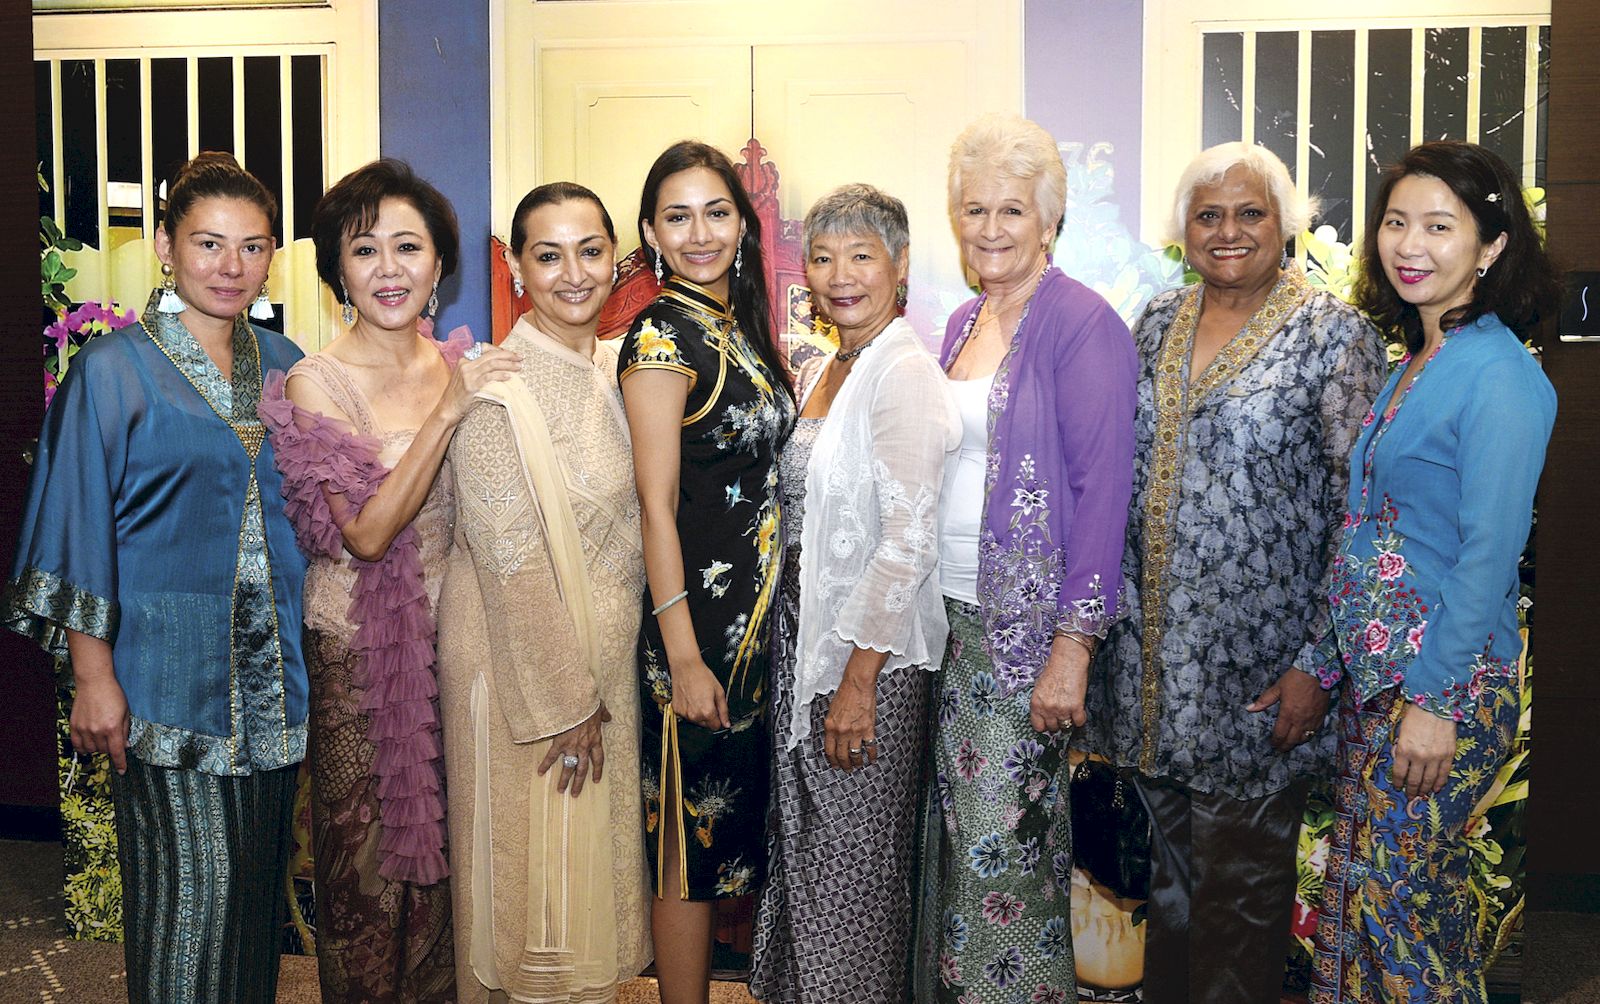 Event photo gallery: Chinese Women’s Association Chinese New Year lunch